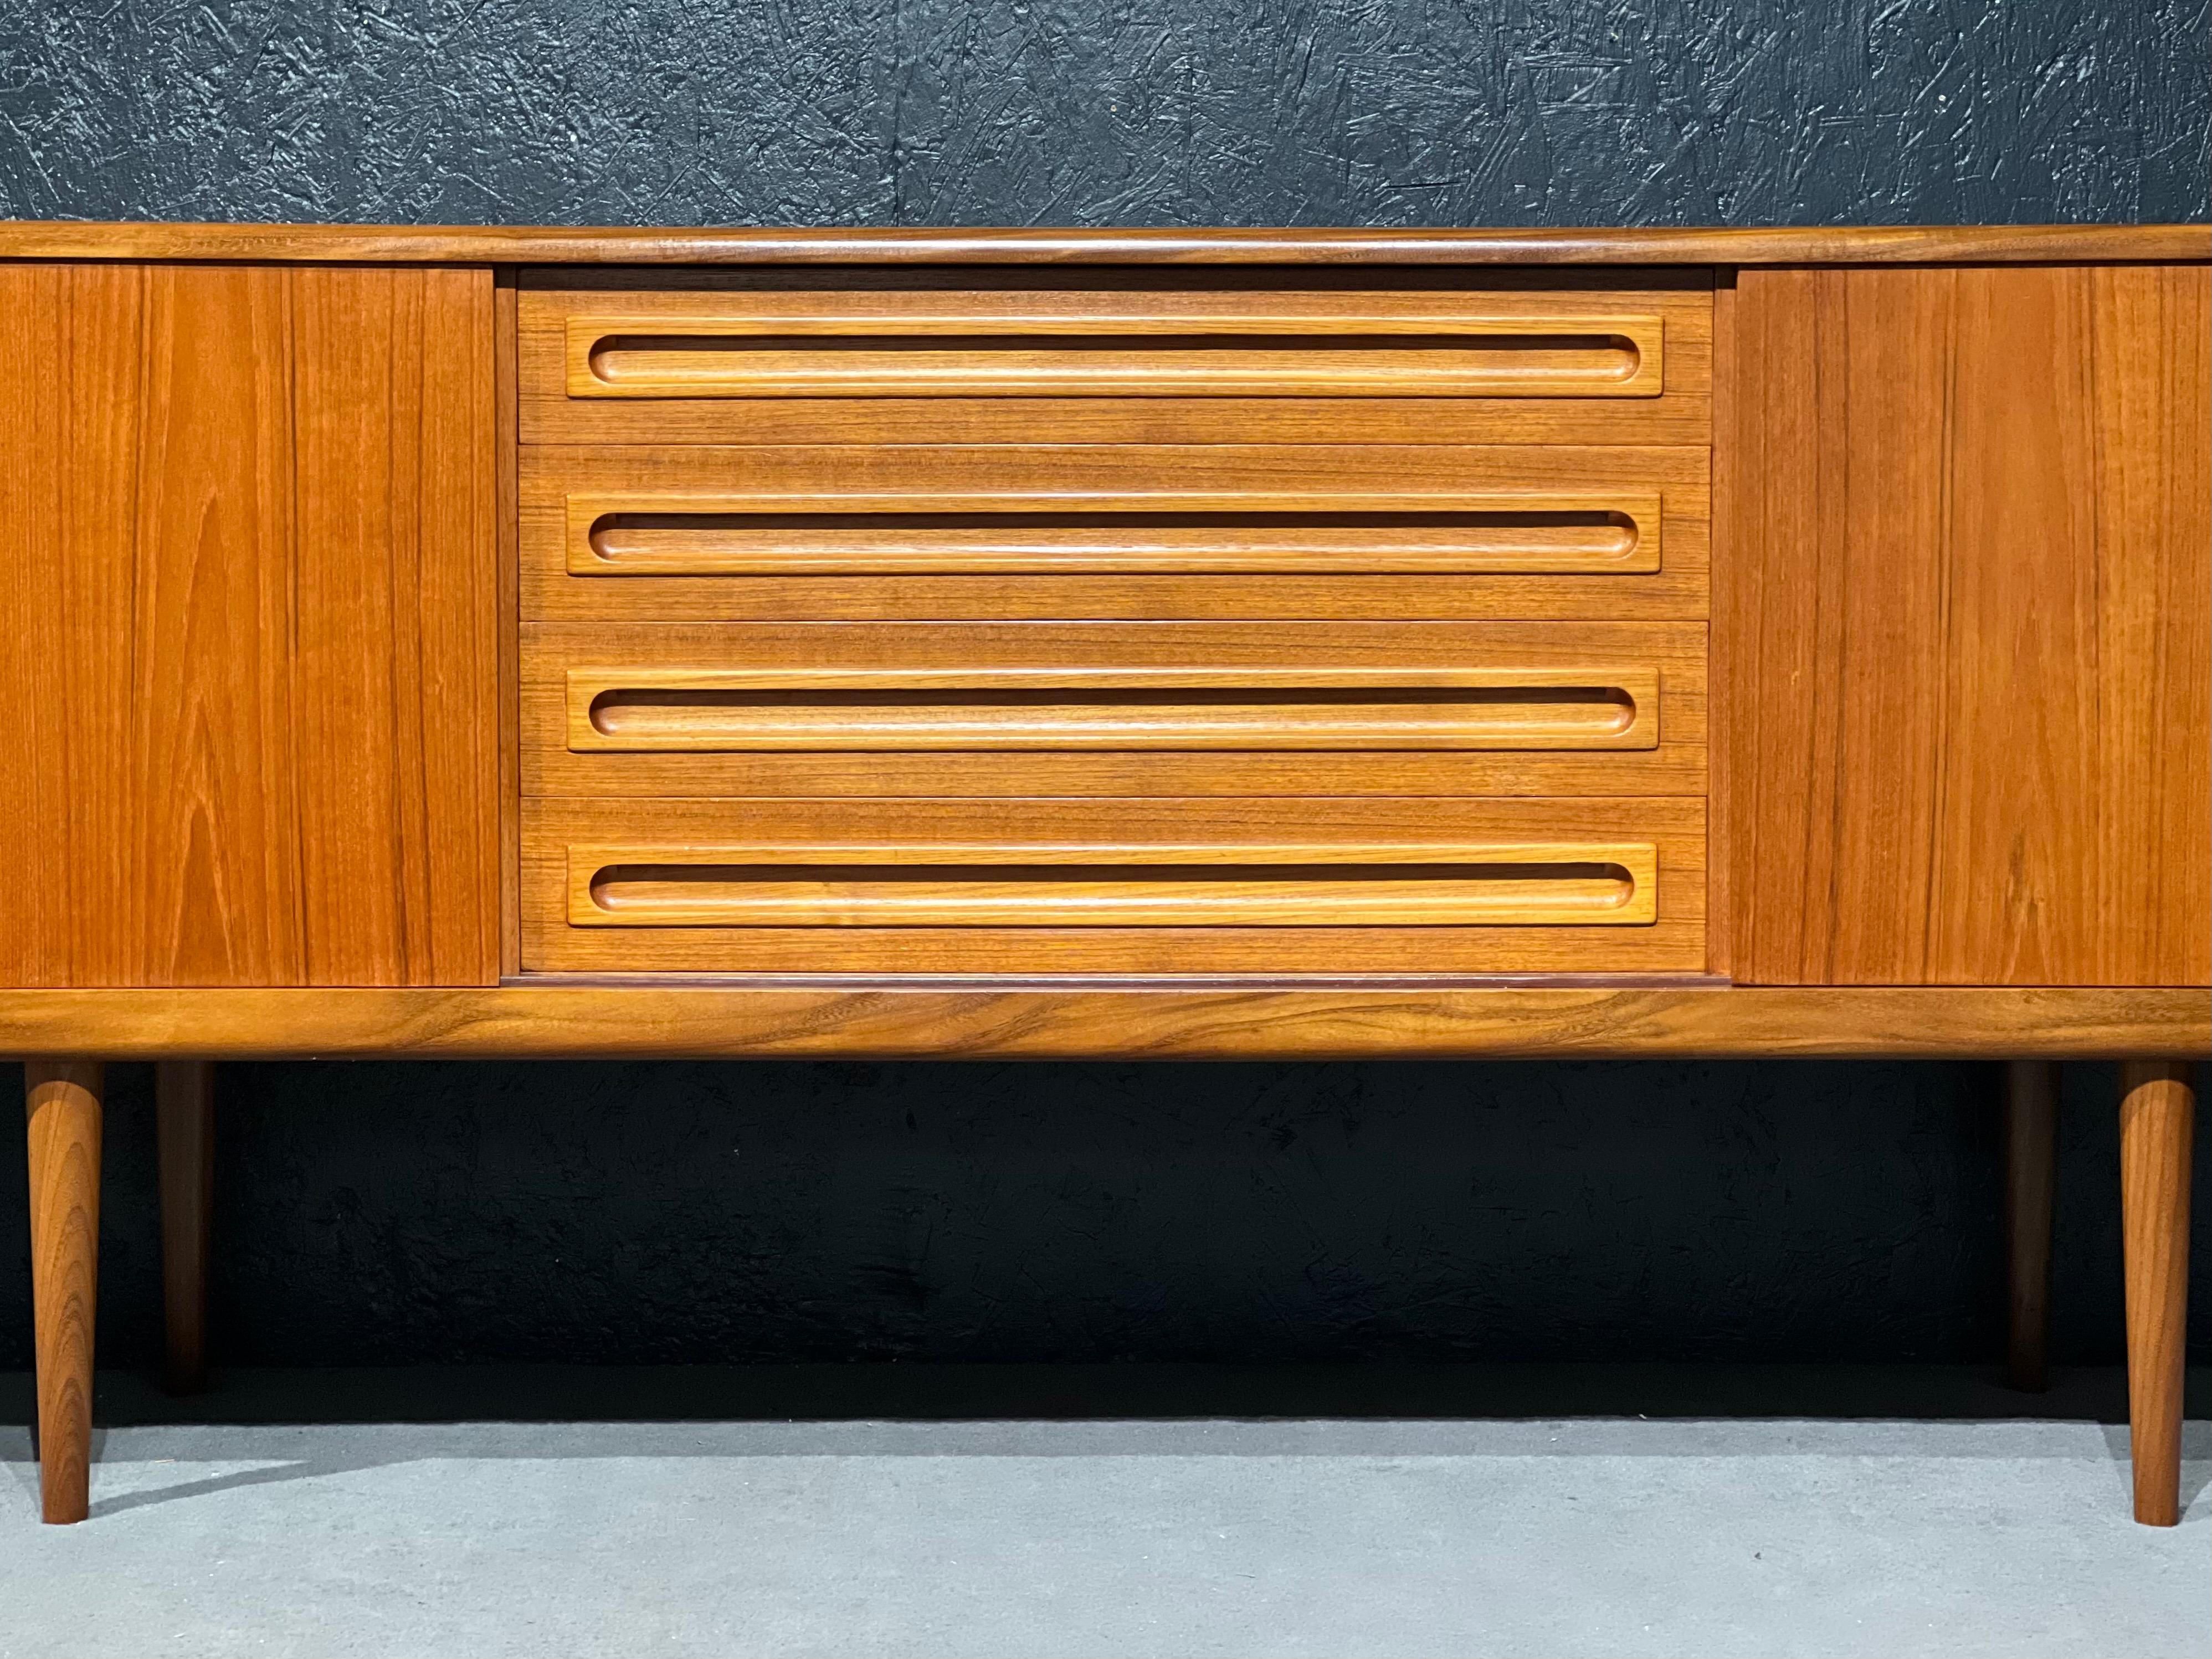 The sideboard design is featured by symmetry, with a bank of 4 drawers n the center and two cupboards enclosed by sliding doors on each side. All were designed and handcrafted with the mastery of the Danish cabinetmakers of the time. 
Johannes